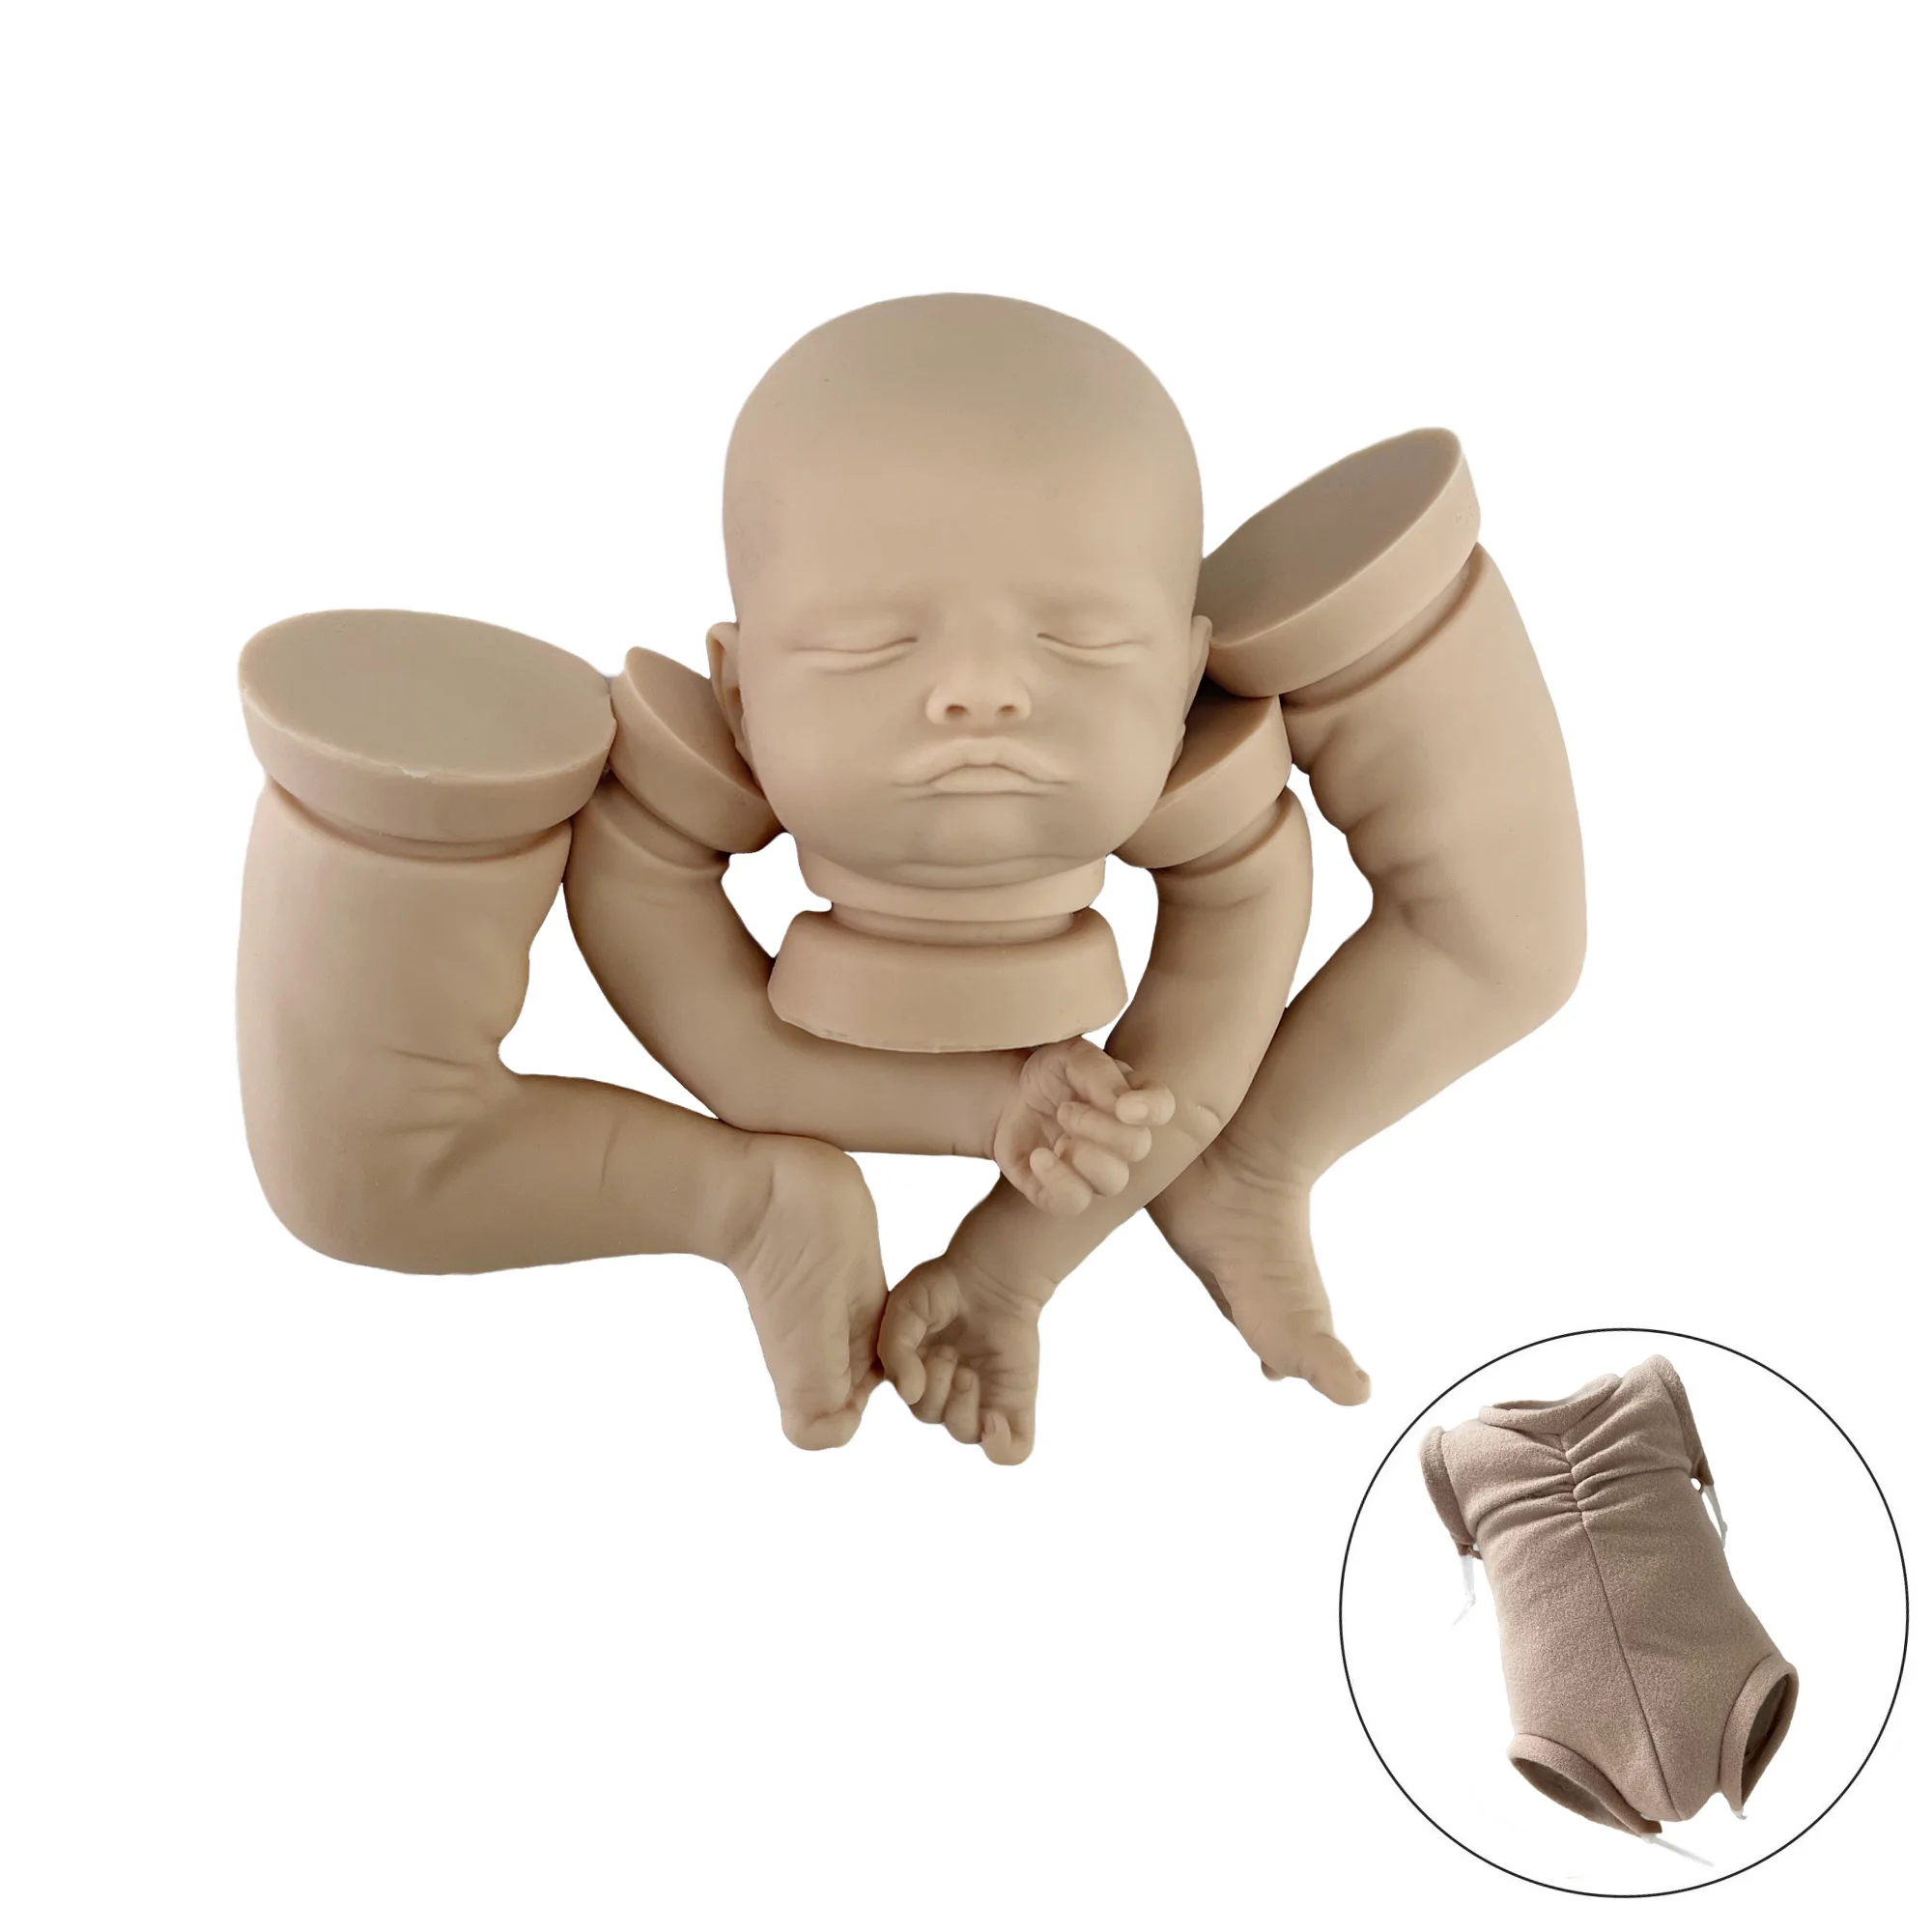 

ACESTAR #ST20N-DK6614 Reborn Baby Dolls Kits 20 Inch 50CM Bebe Reborns Unpainted Silicone Plain Kit for Collector